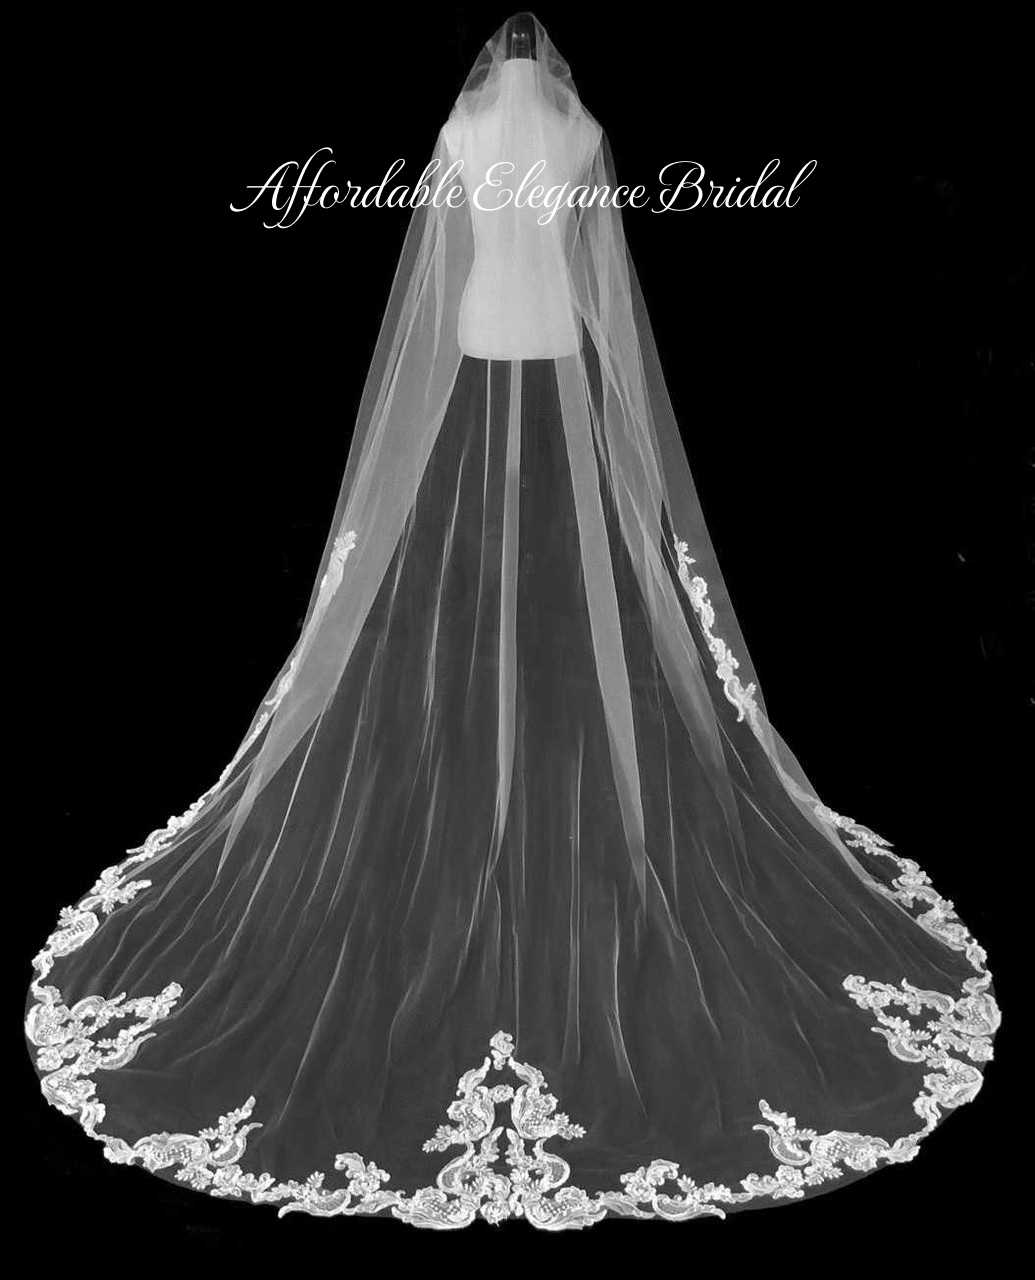 https://cdn11.bigcommerce.com/s-zb3qt33o/images/stencil/original/products/18678/63699/Beaded-French-Alencon-Lace-Royal-Cathedral-Wedding-Veil-Extra-Width_63600__70419.1696949408.jpg